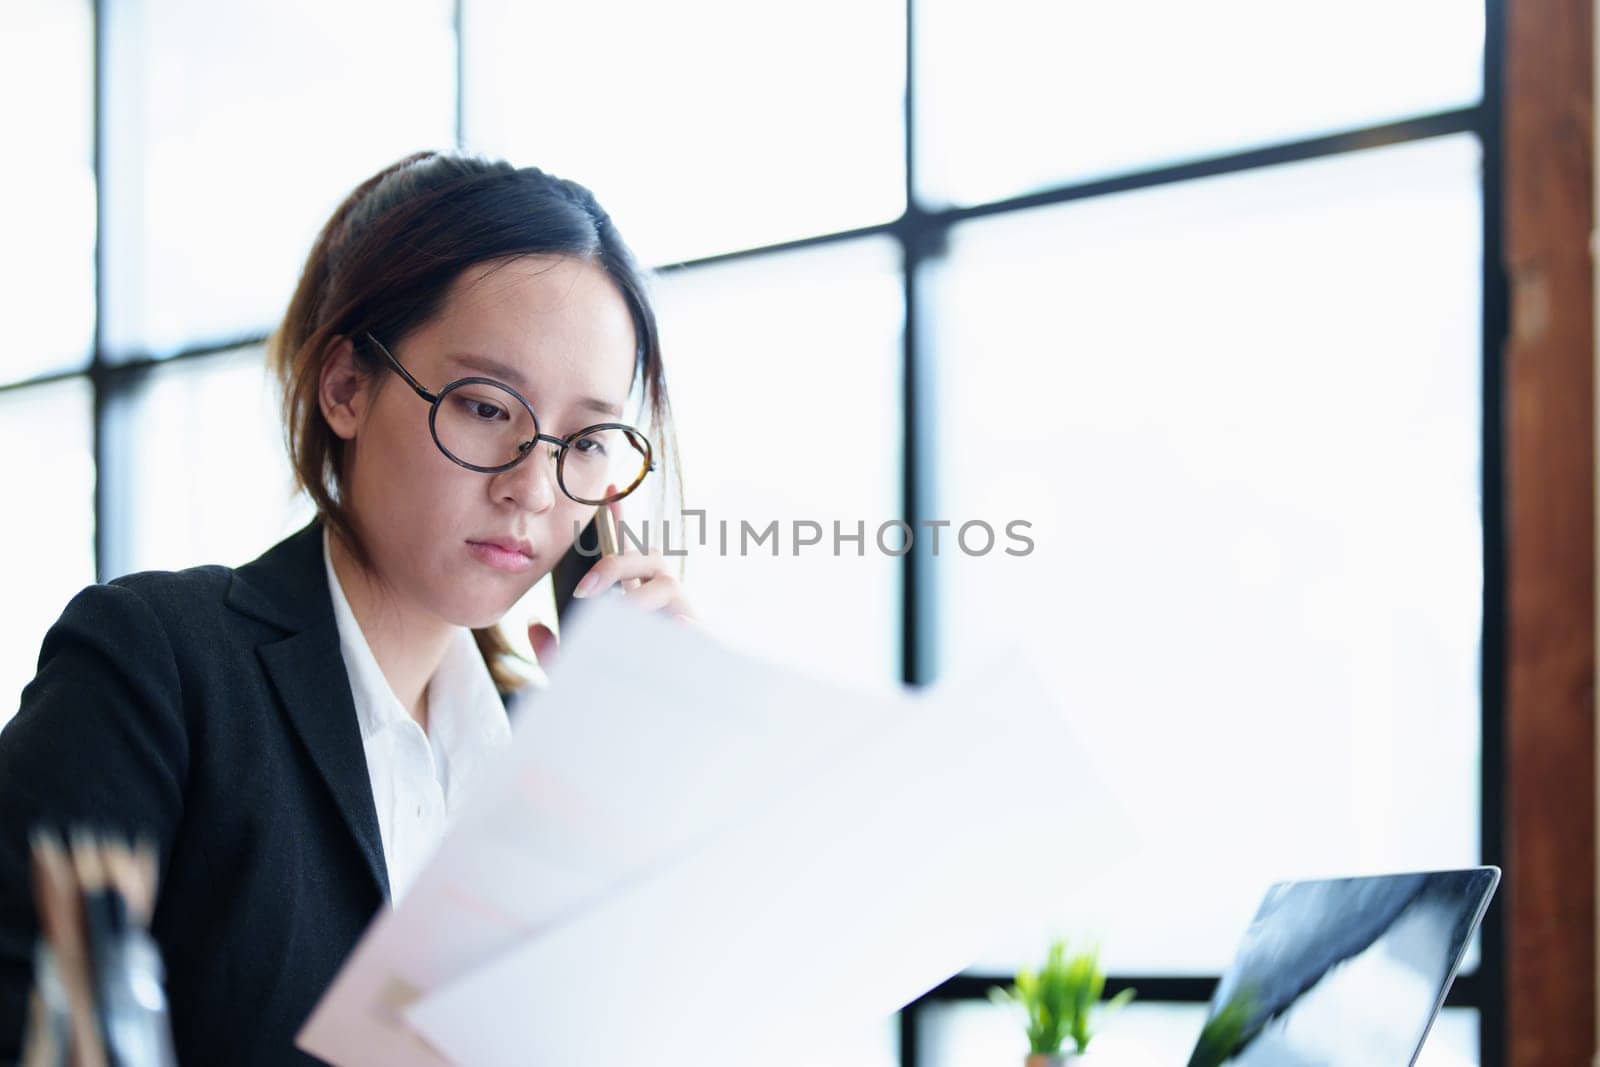 Portrait of a young Asian woman showing a serious face as she uses her phone, financial documents and computer laptop on her desk in the early morning hours.